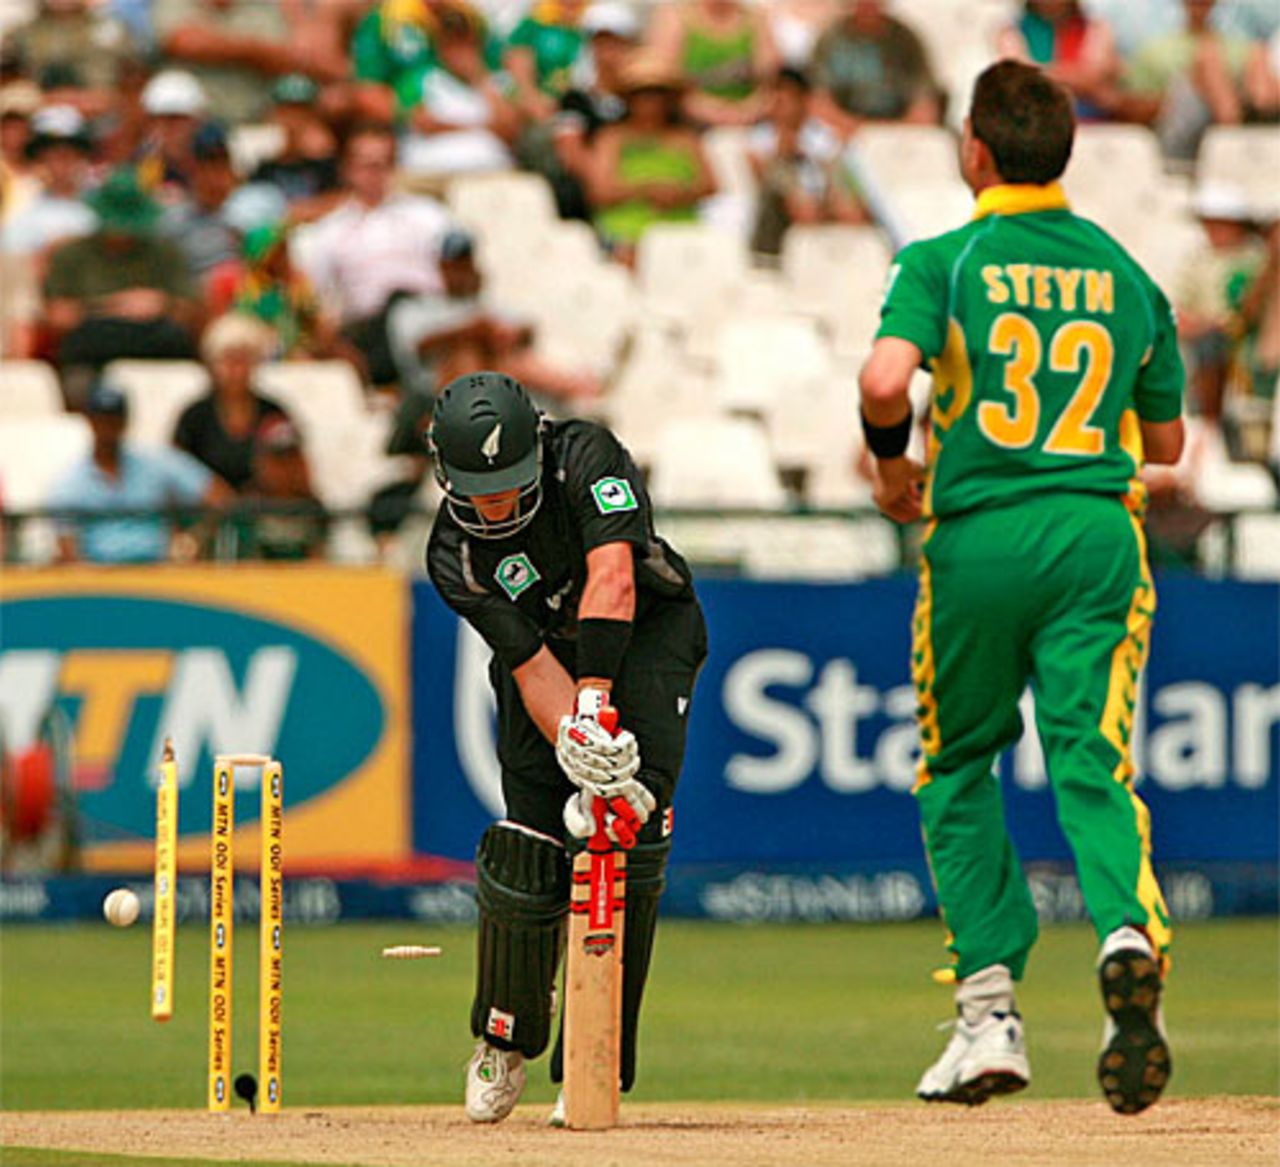 Lou Vincent is clean bowled by Dale Steyn, South Africa v New Zealand, 3rd ODI, Cape Town, December 2, 2007